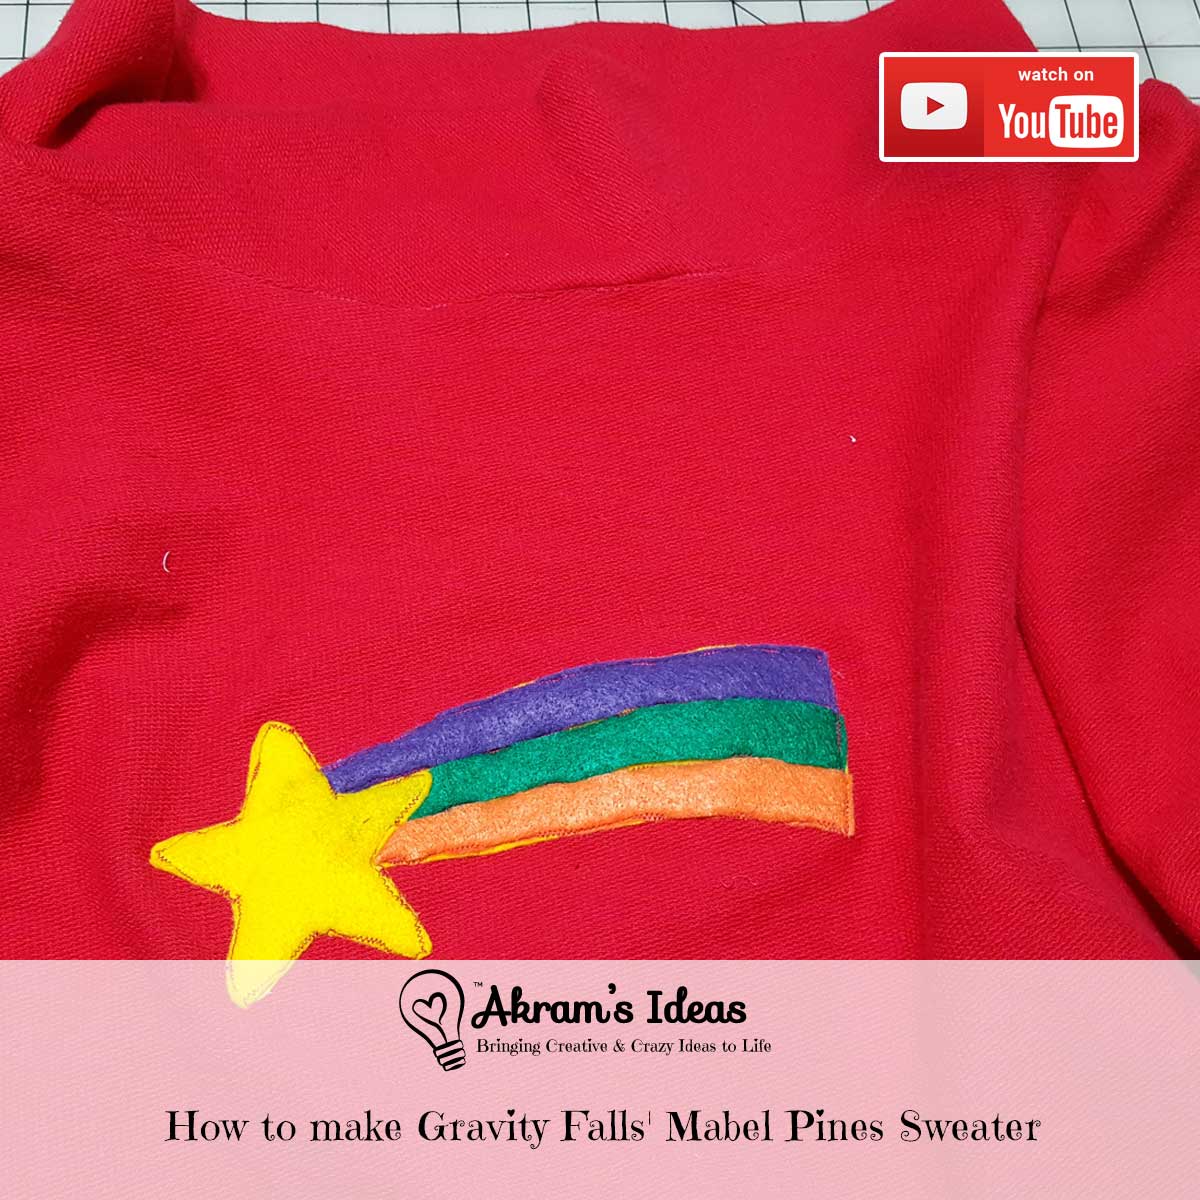 Learn the process I went through the make my Gravity Falls’ Mabel Pines sweater using New Look 6145 pattern.